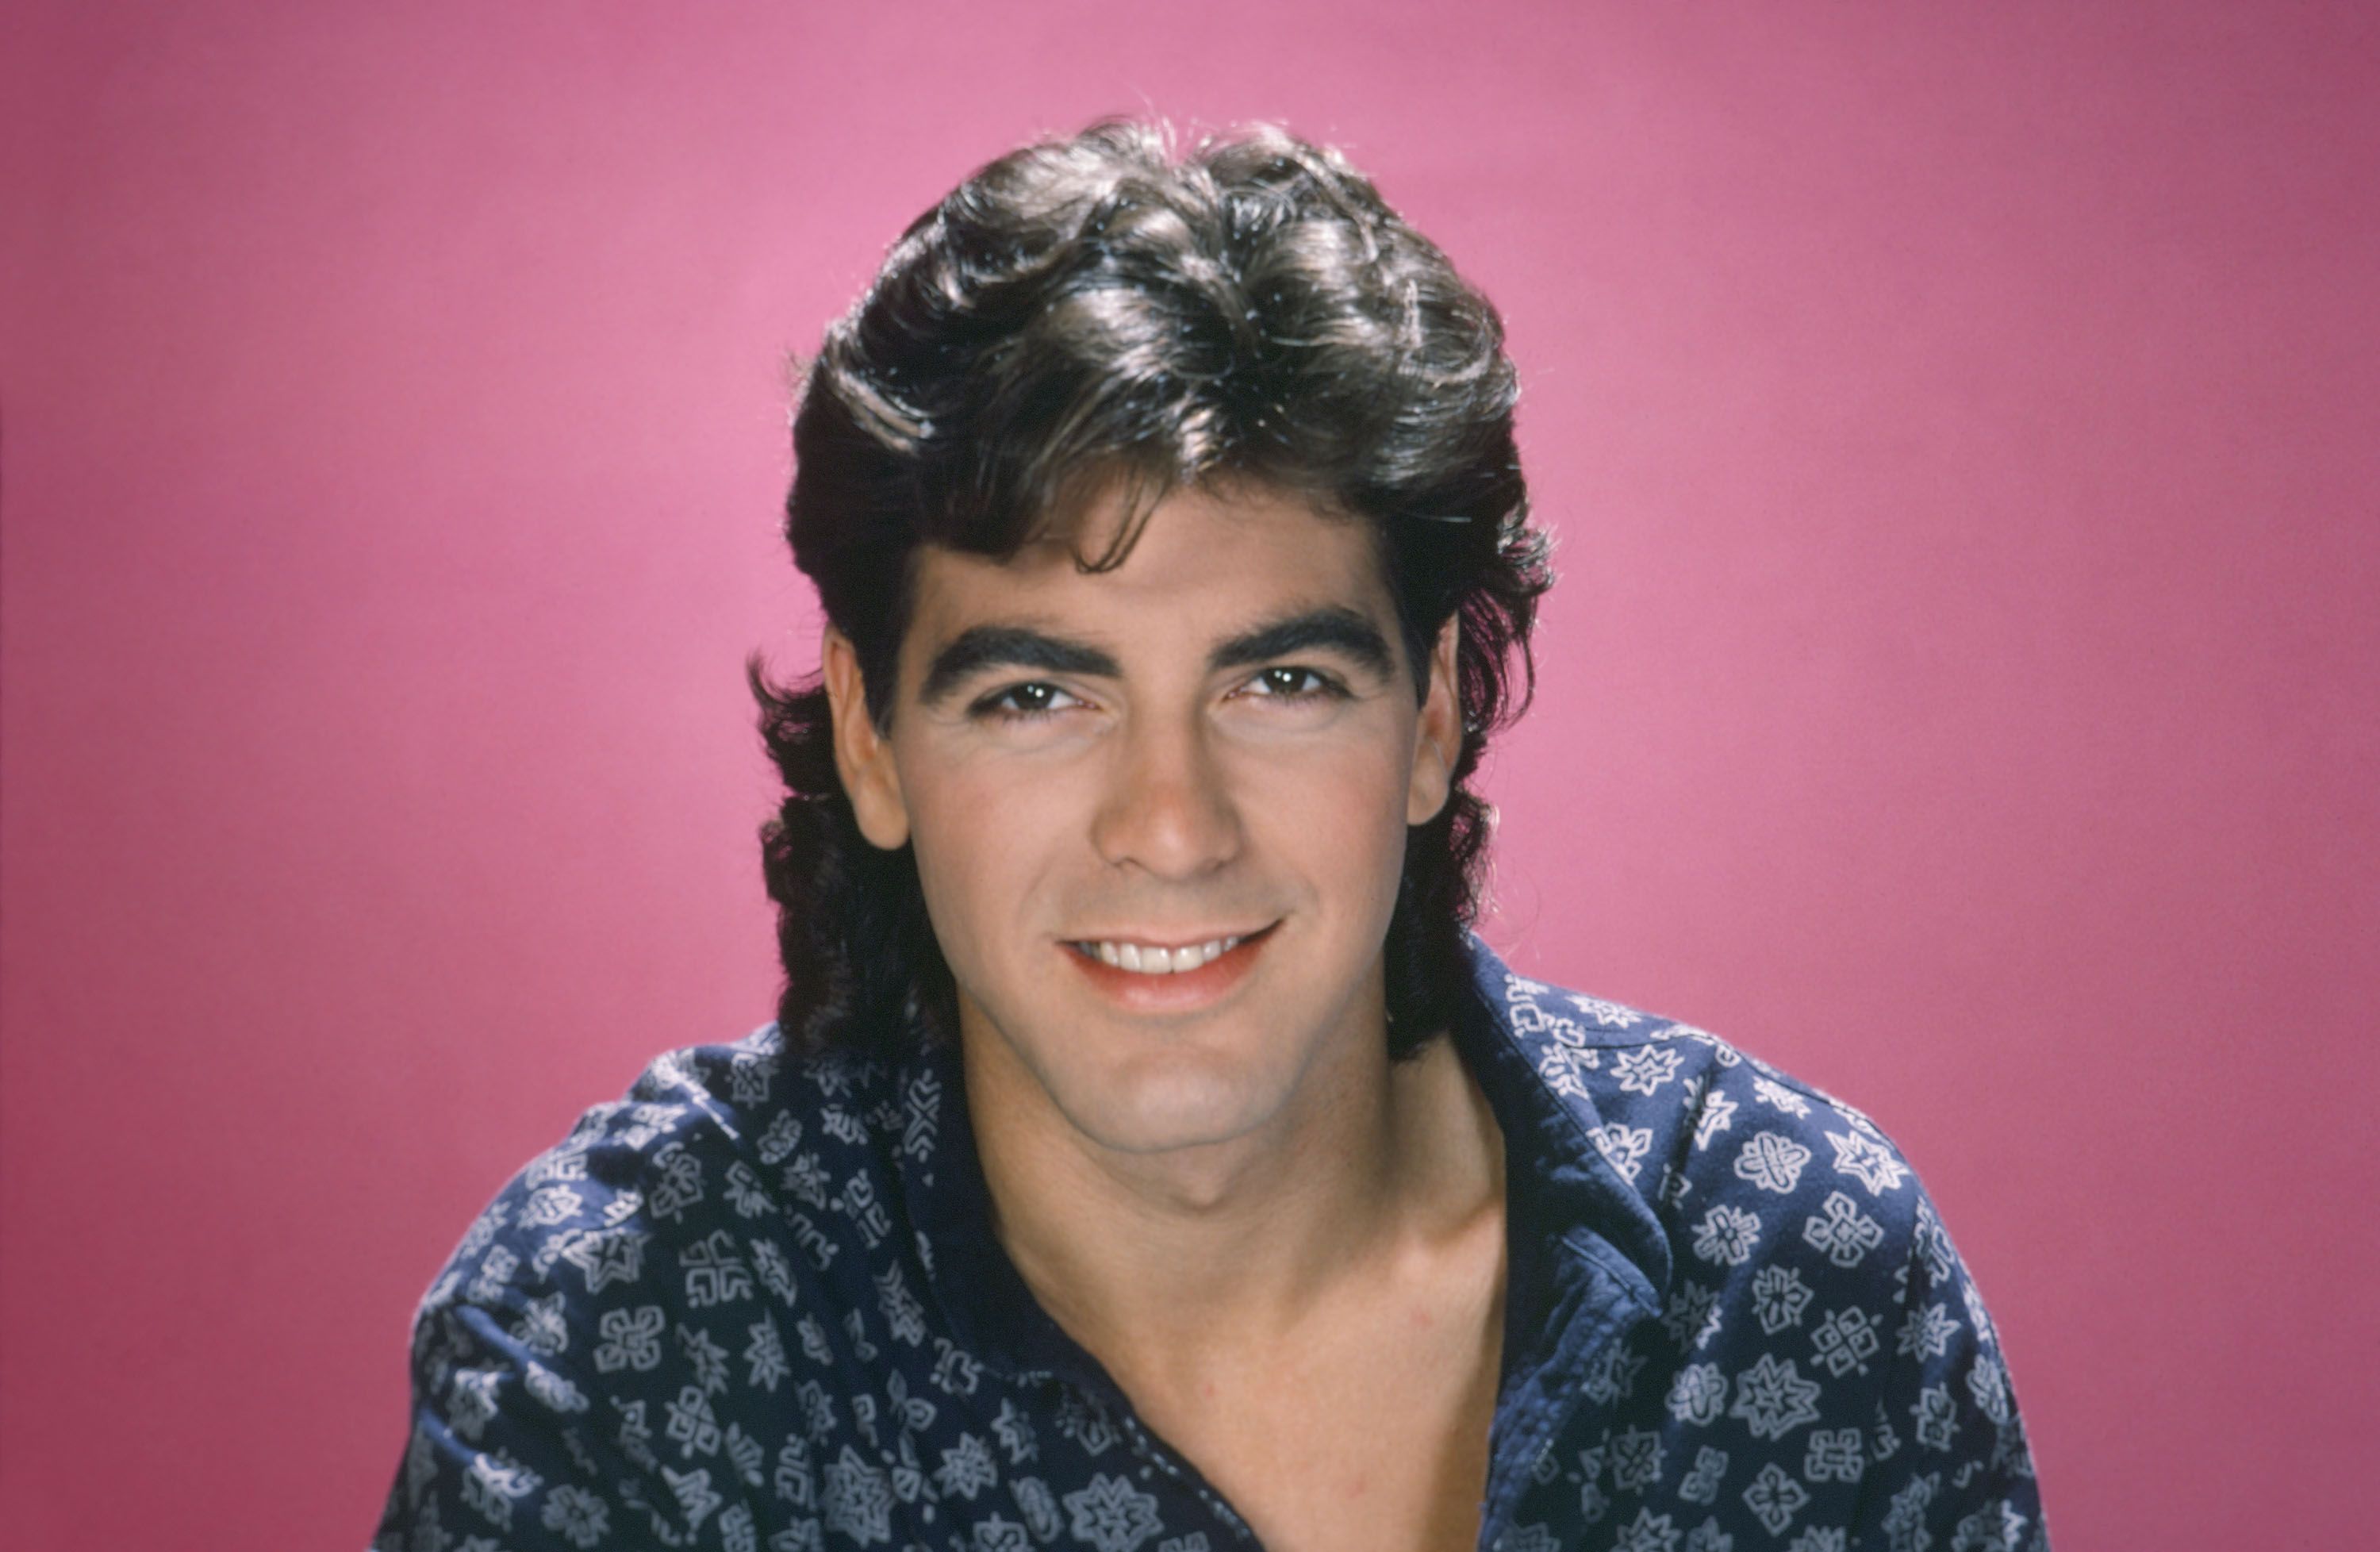 40 Iconic Celebrity Mullets Over the Years